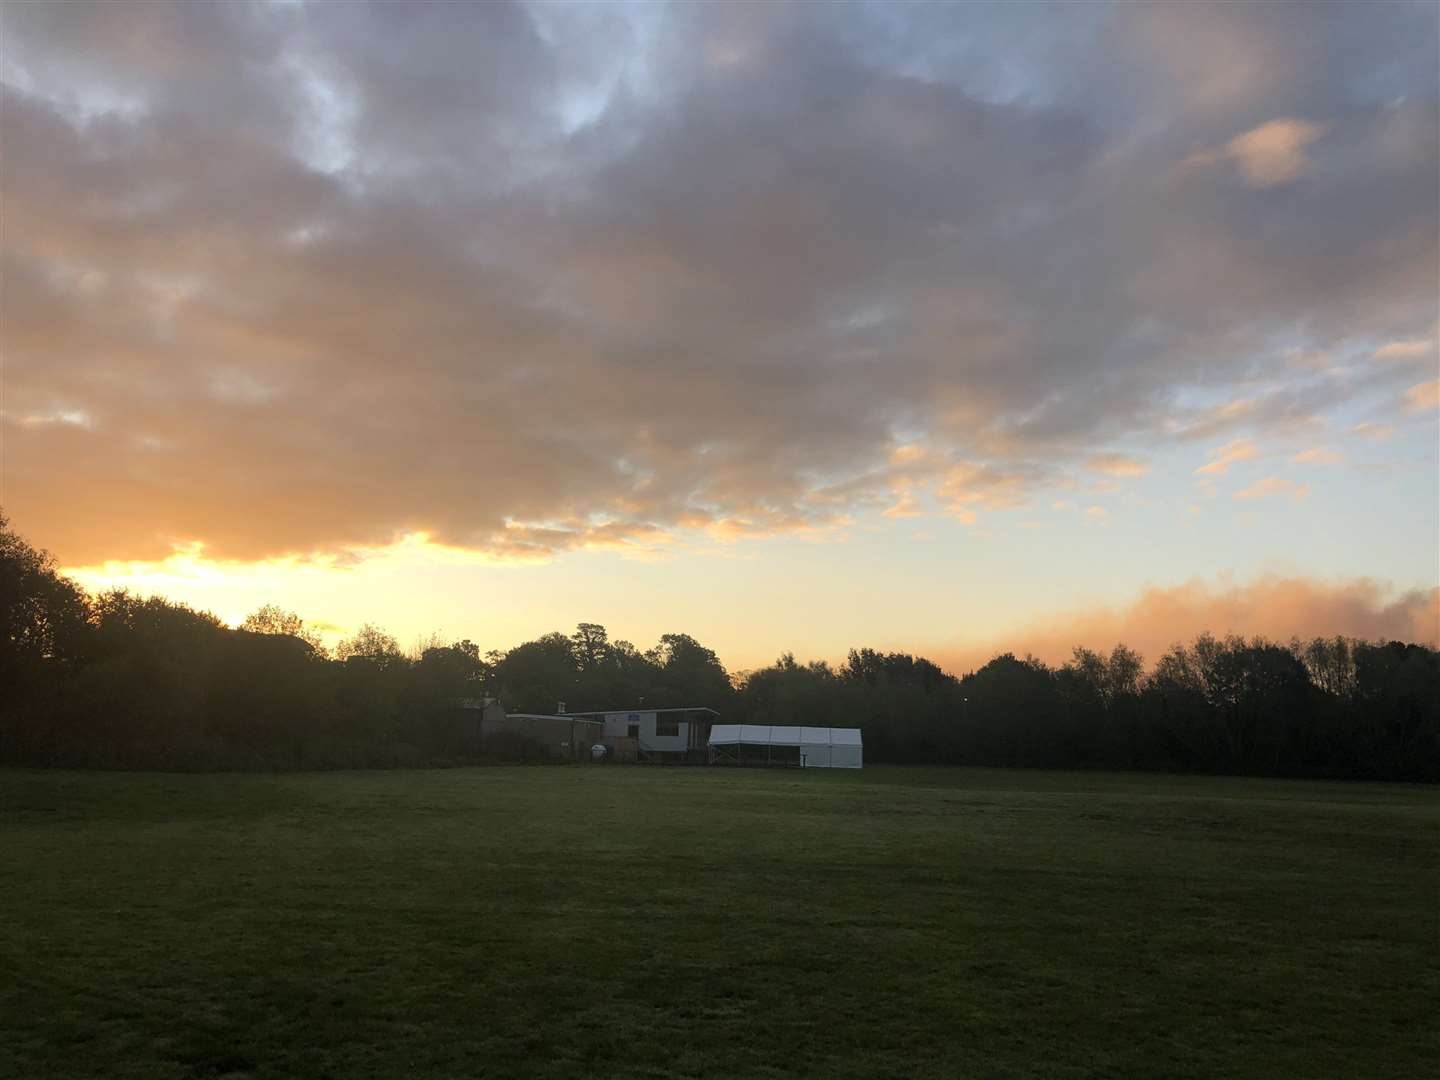 Smoke from the Tonbridge fire could be seen from the Judians' rugby pitch. Picture: James Watson